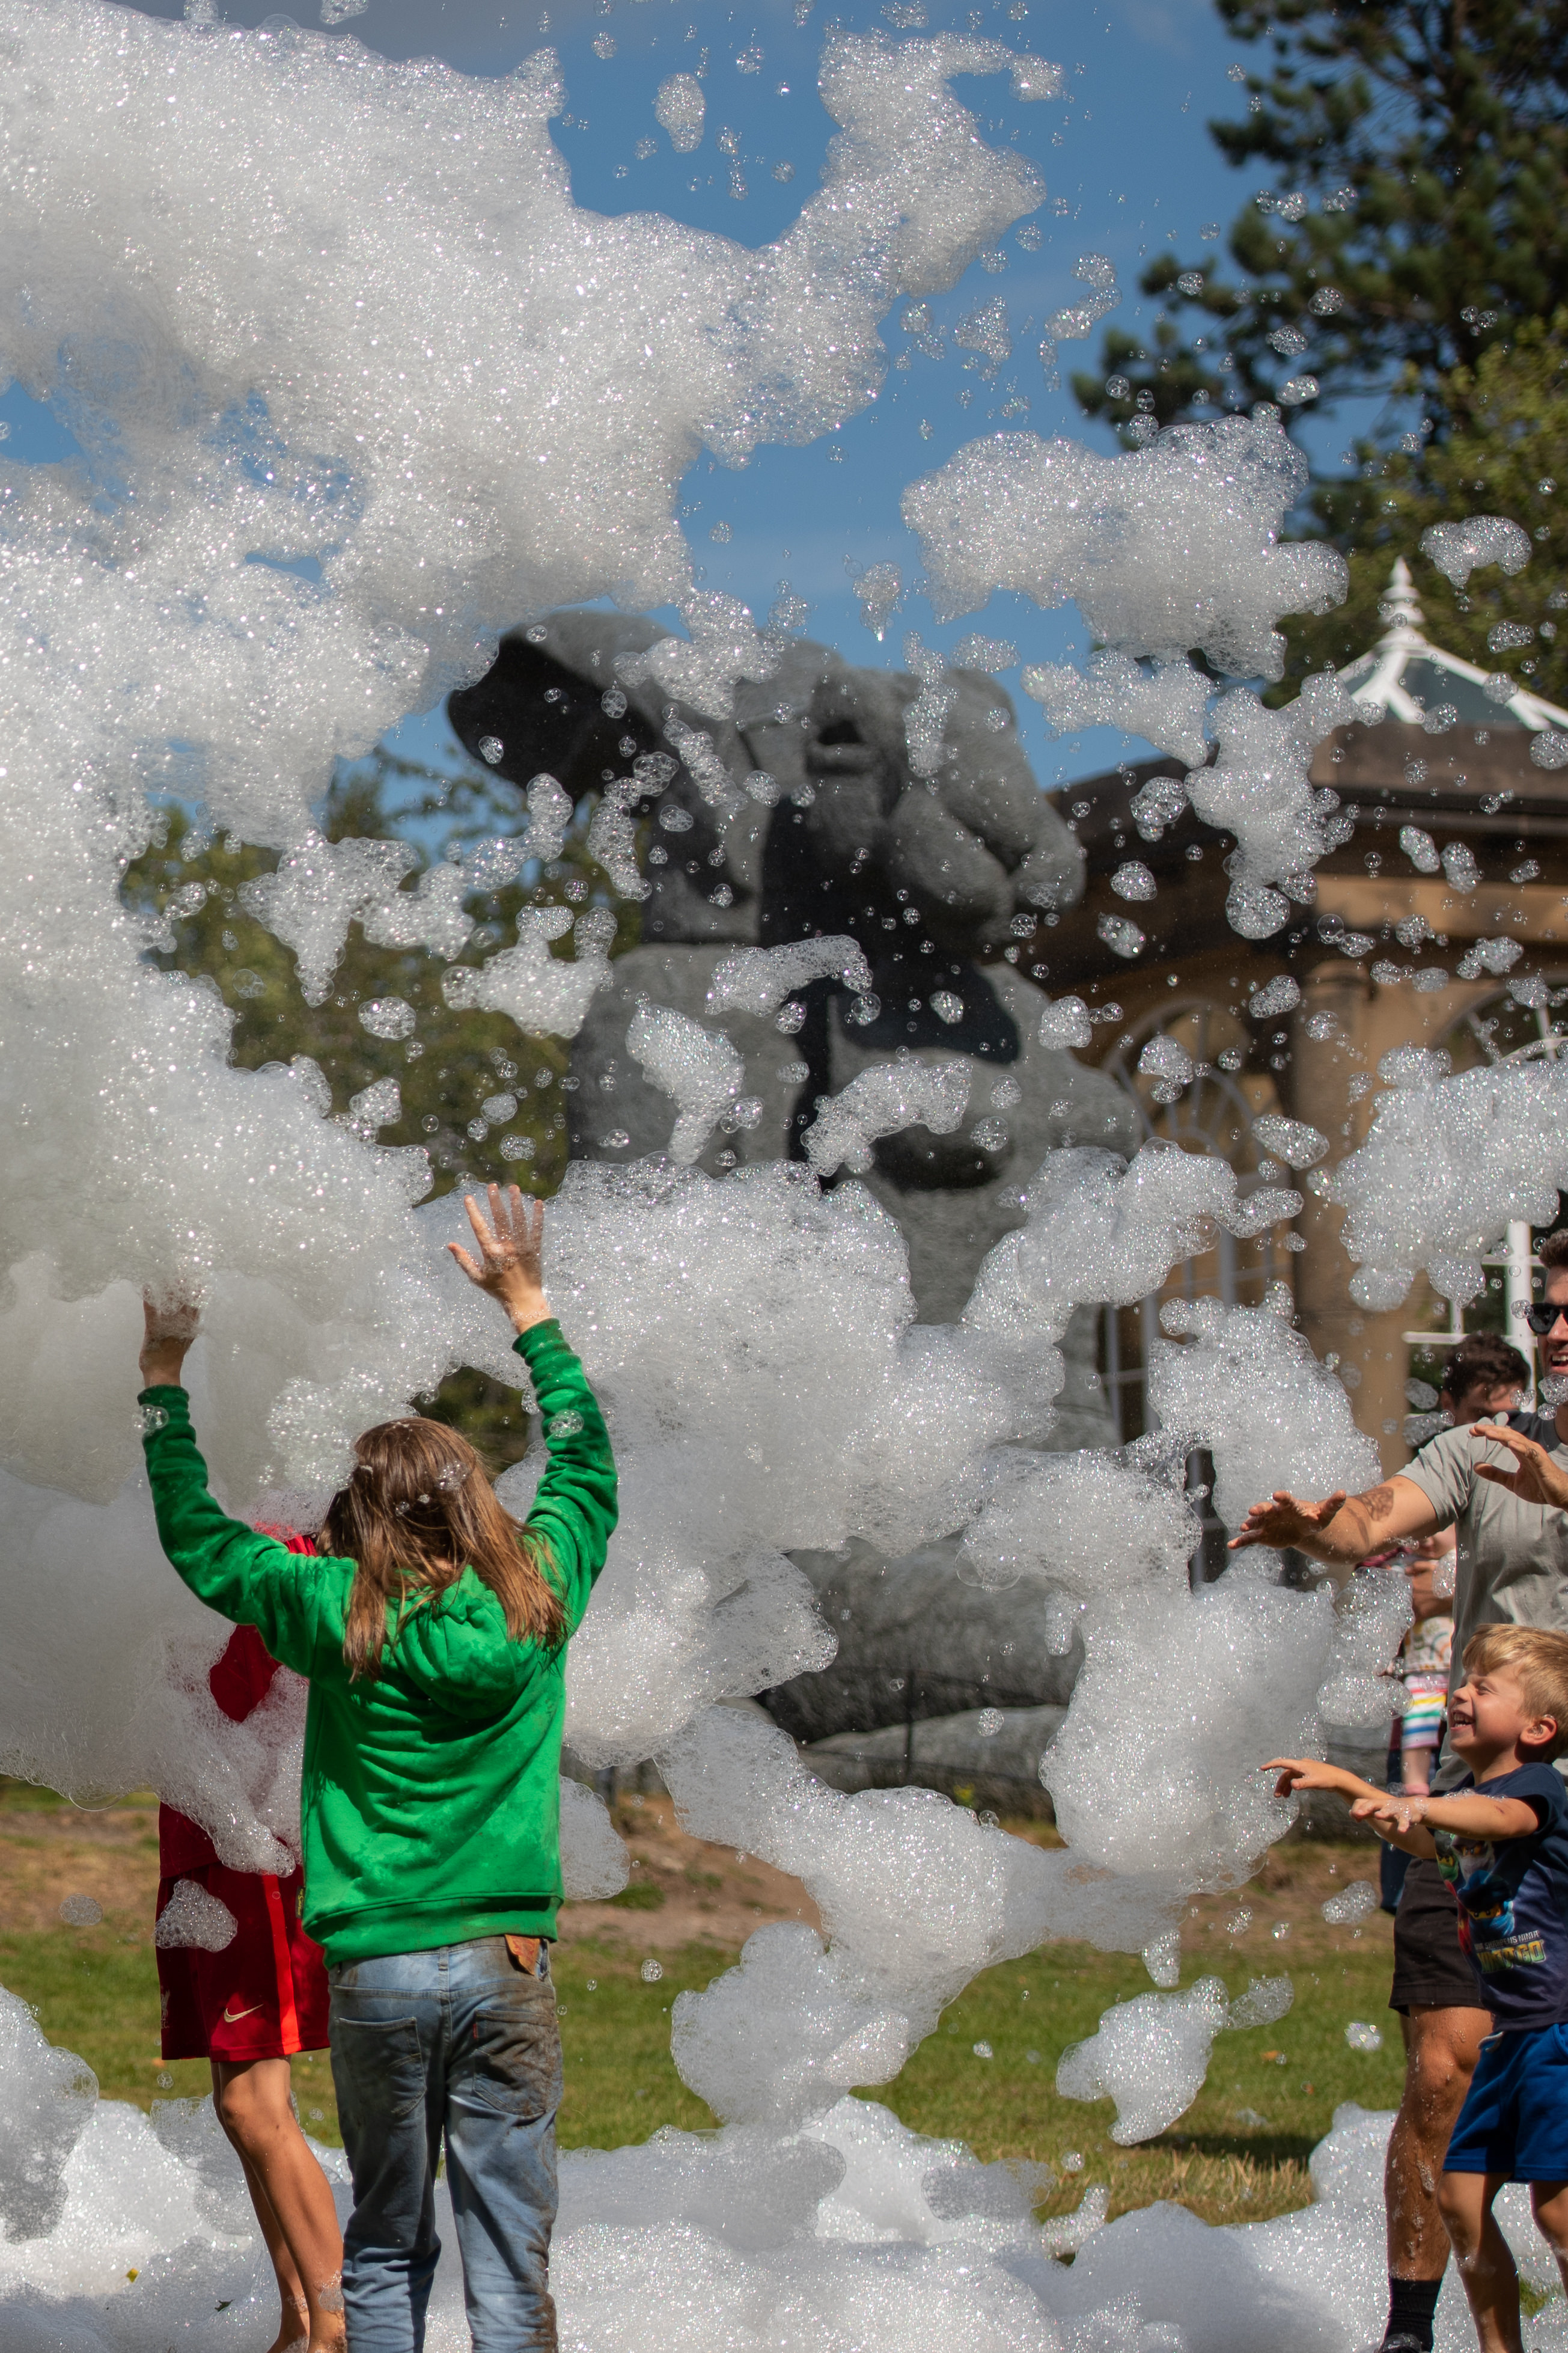 A group of people playing in a cloud of foam outdoors